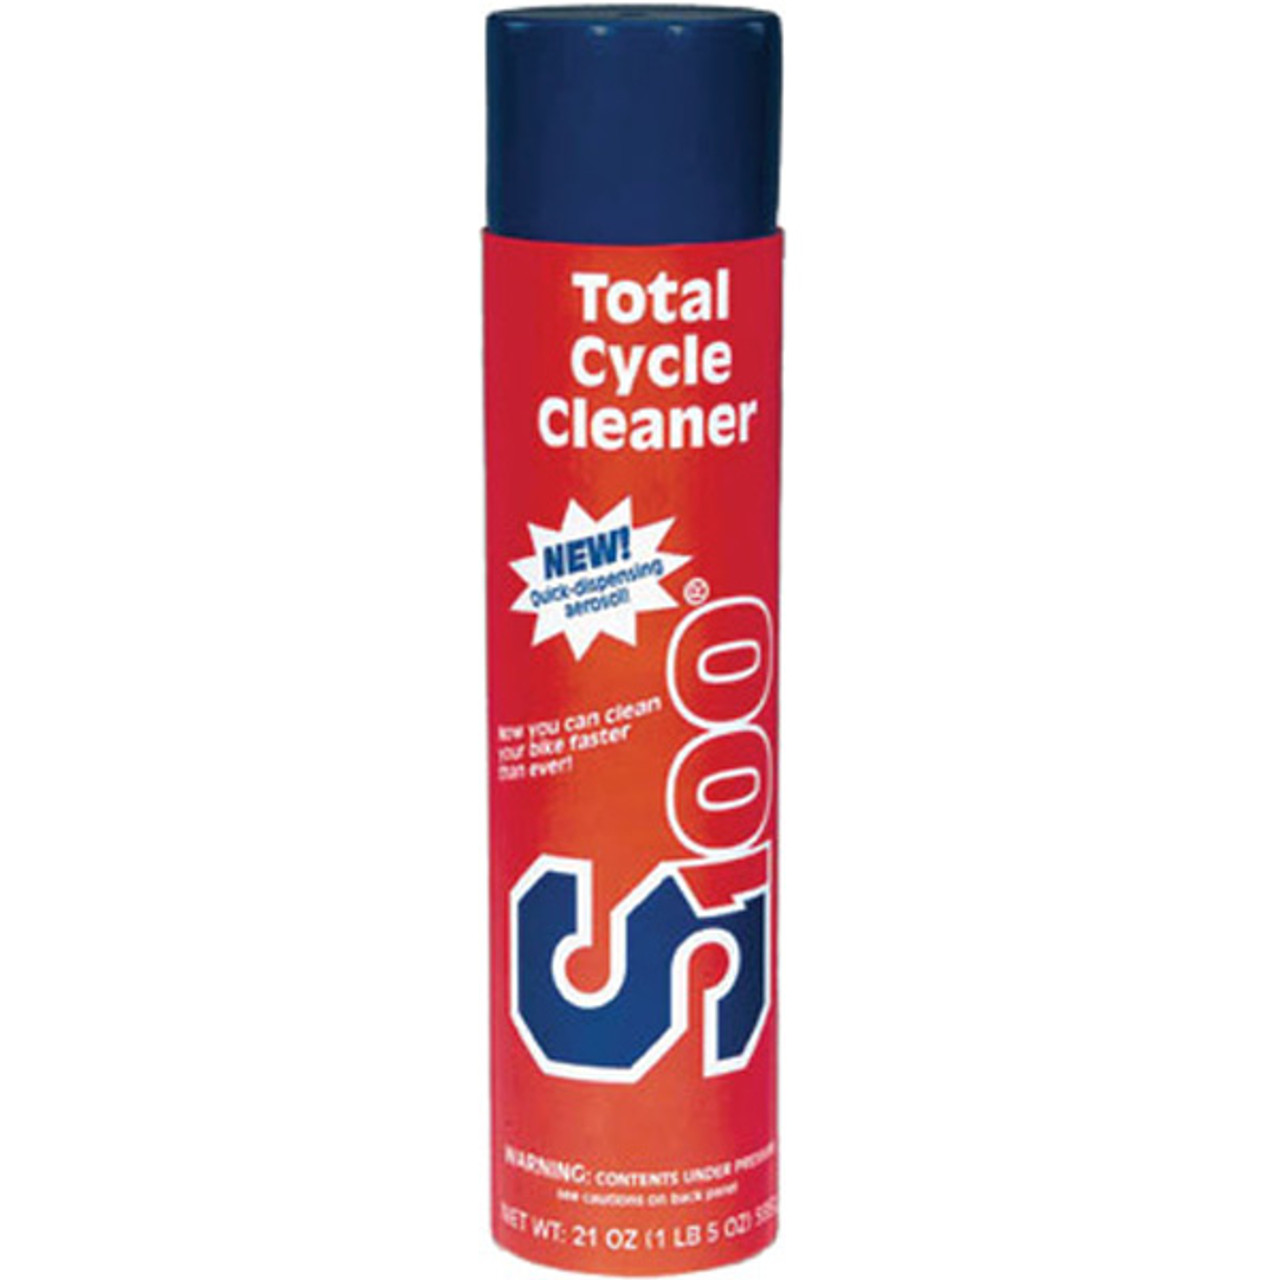 How I wash my motorcycles with S100 Total Cycle Cleaner 